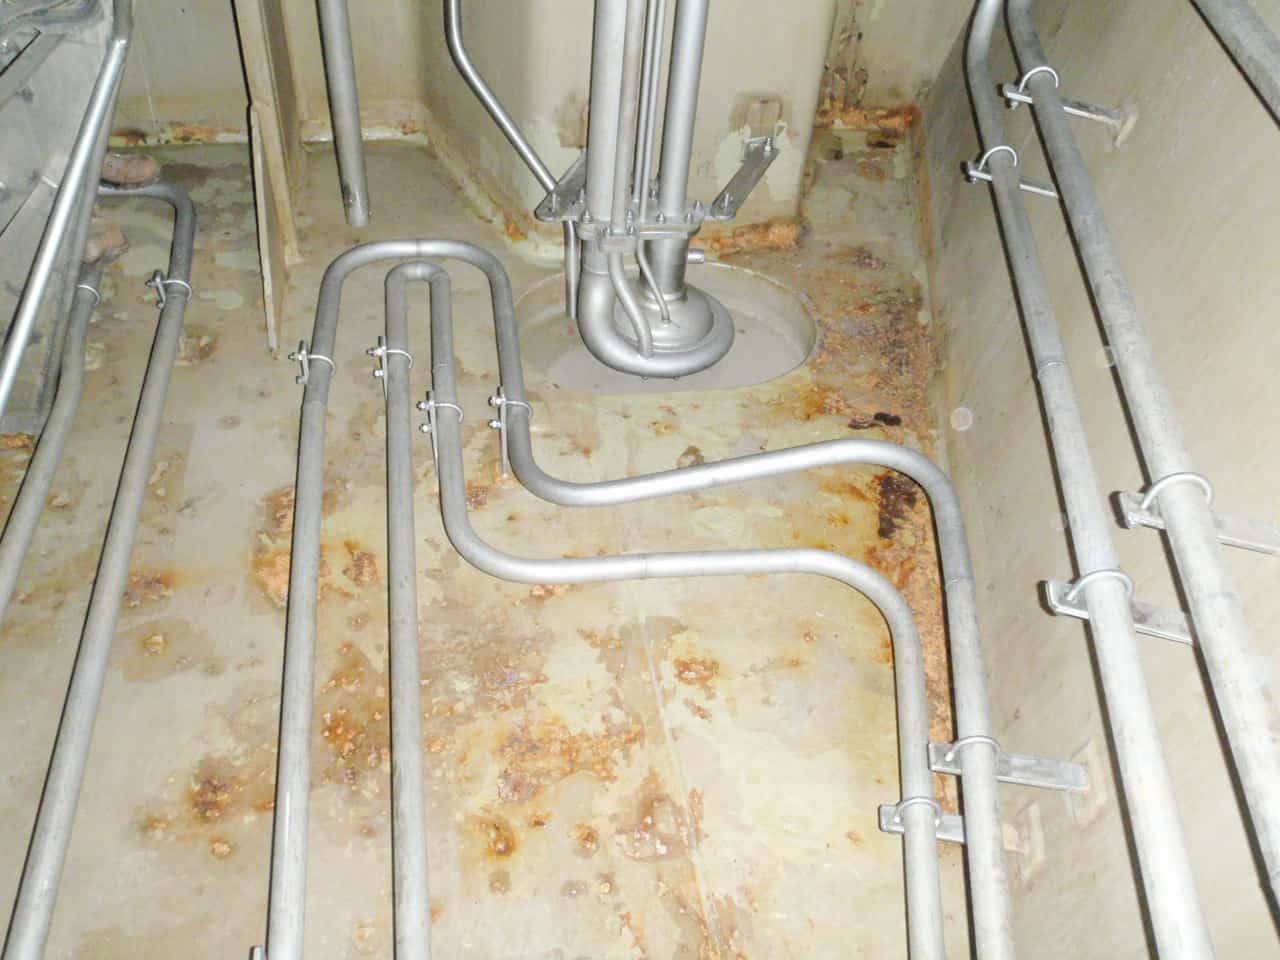 blistered chemical tank floor with grey piping